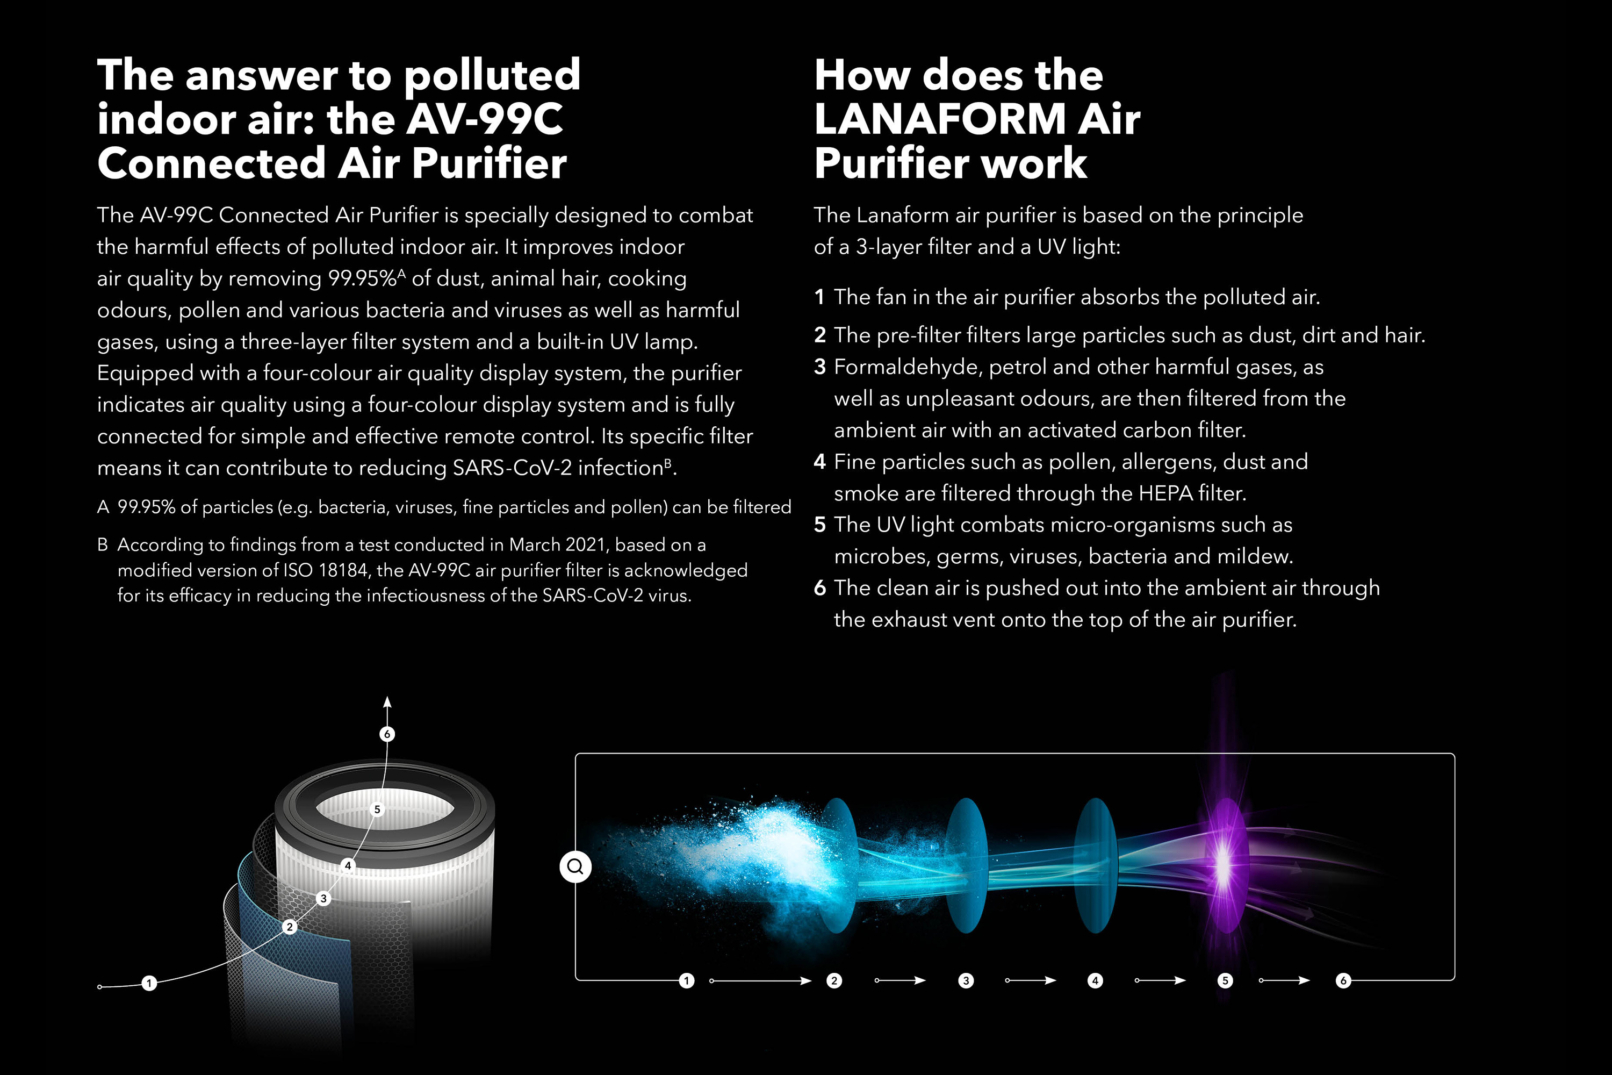 Page 3 of a presentation for the AV-99C Air Purifier depicting the product as the answer to polluted indoor air and explaining how it works